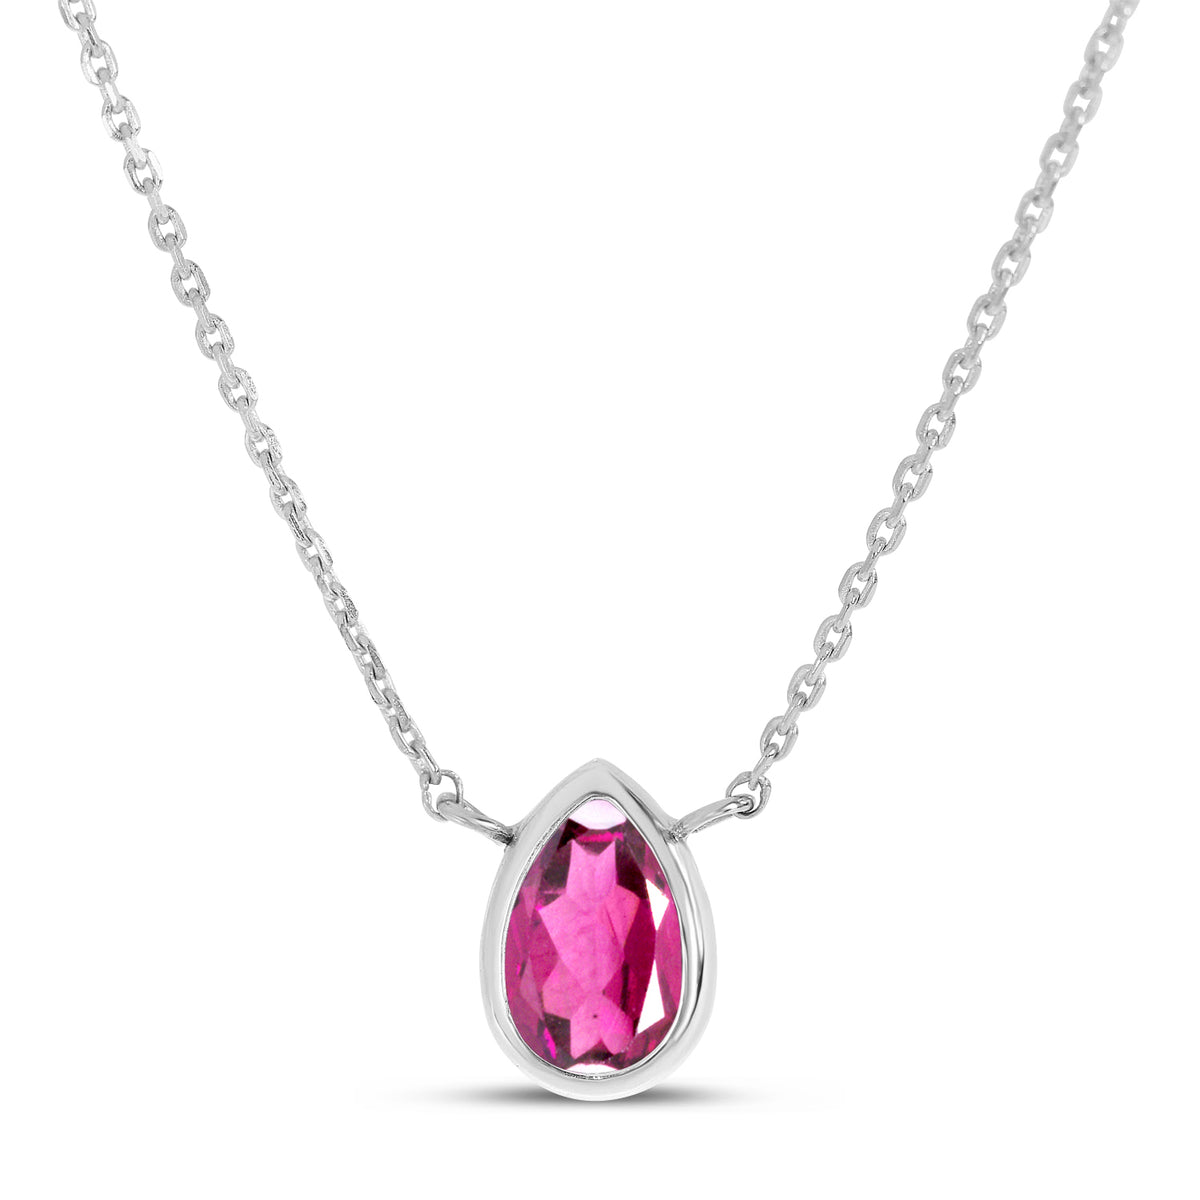 14K White Gold 6x4mm Pear Shaped Pink Tourmaline Birthstone Necklace